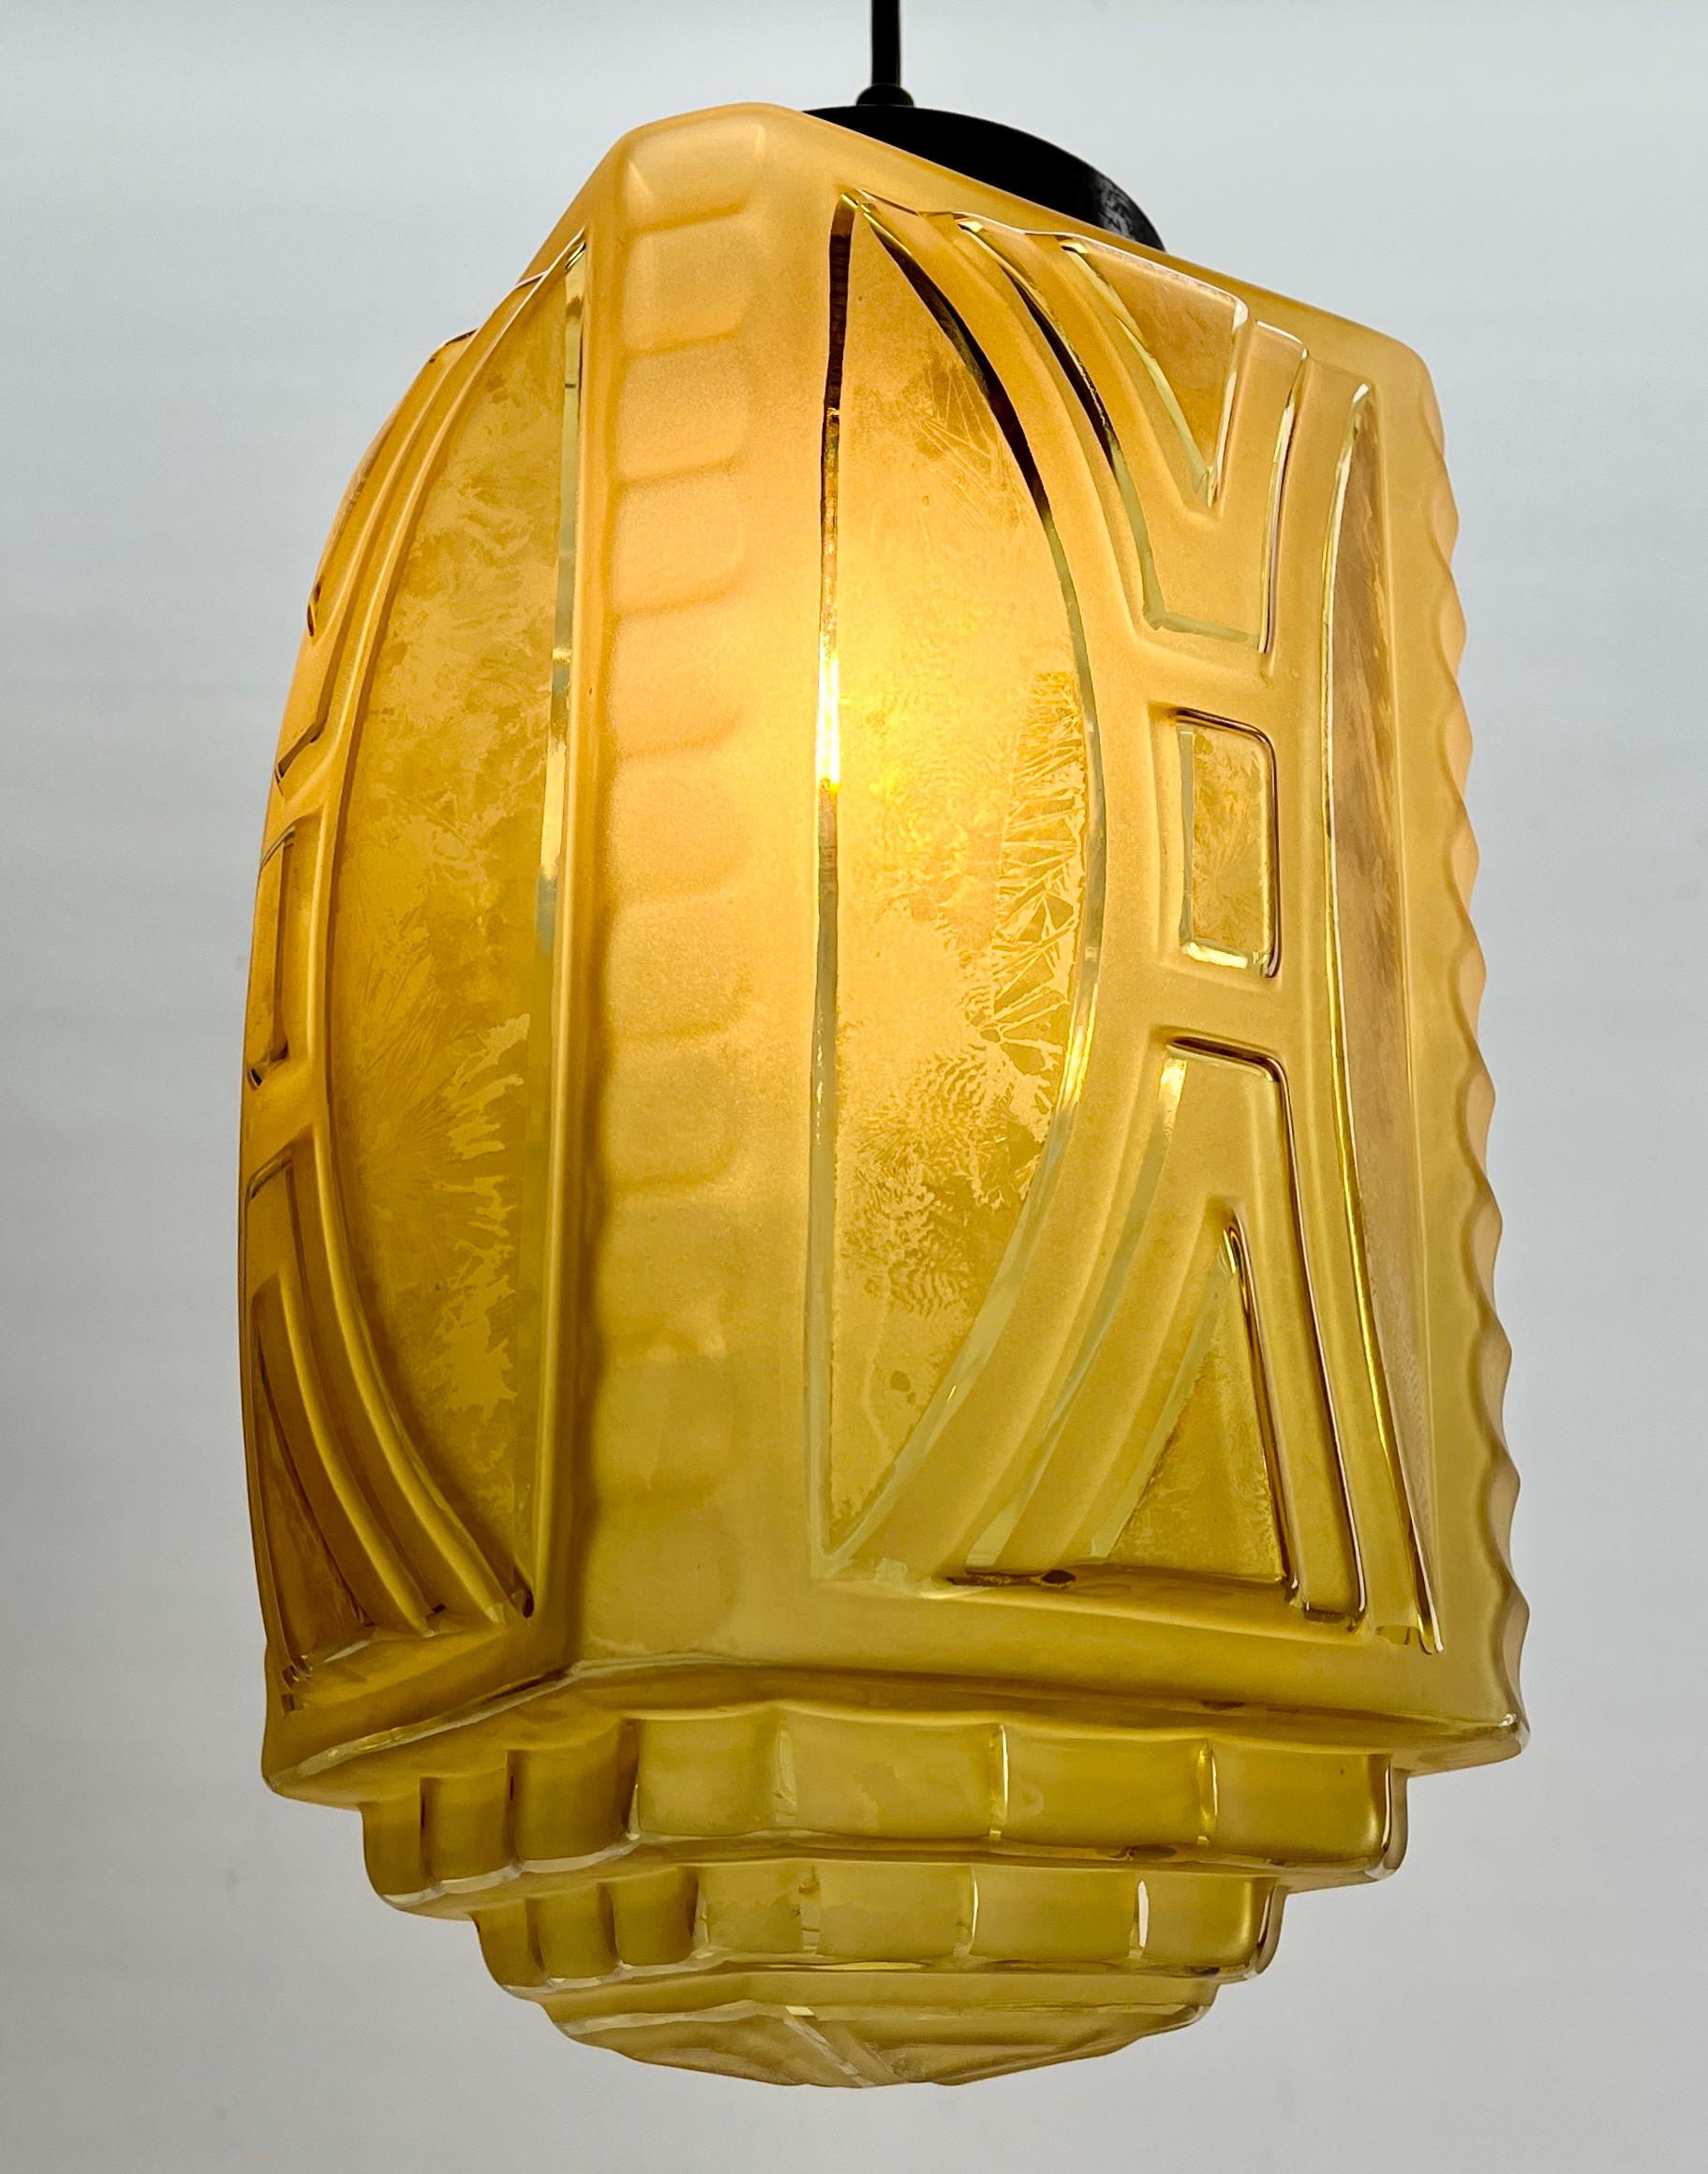 Hand-Crafted Art Deco Ceiling Lamp, Belgium Glass Shade Scailmont, 1930s For Sale